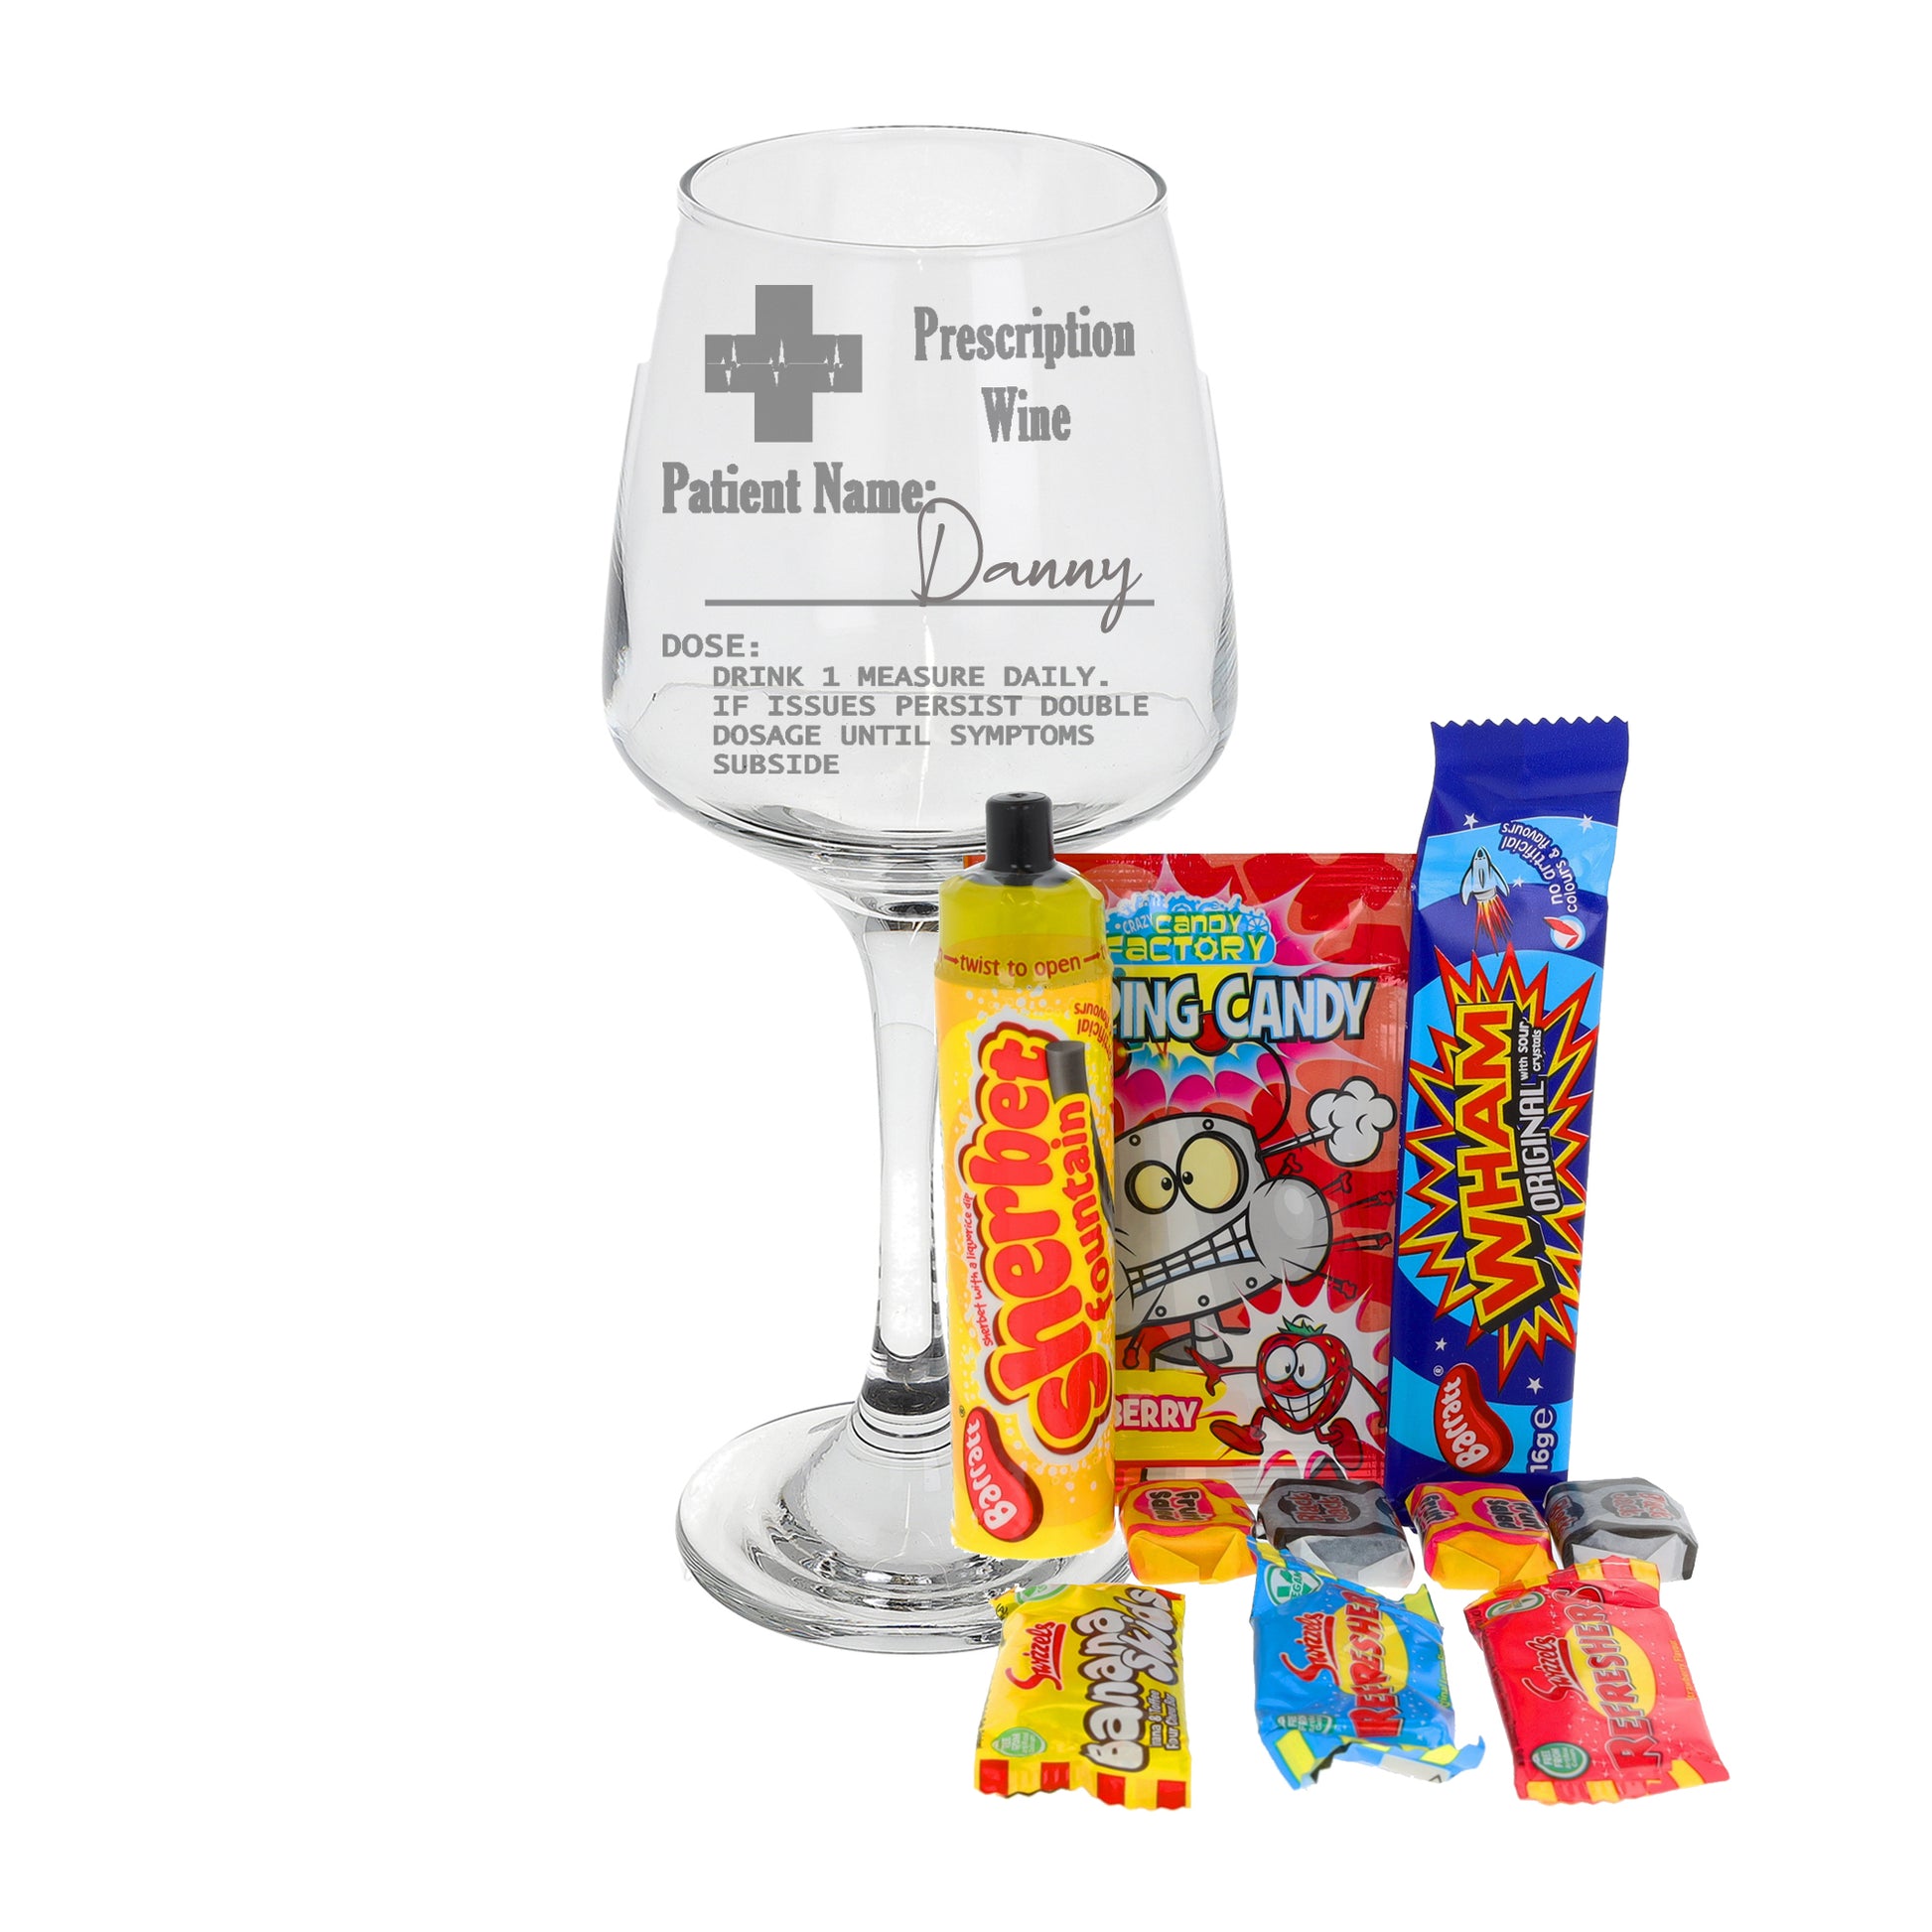 Personalised Engraved Prescription Wine Glass Gift  - Always Looking Good - Small - Filled with Retro Sweets  